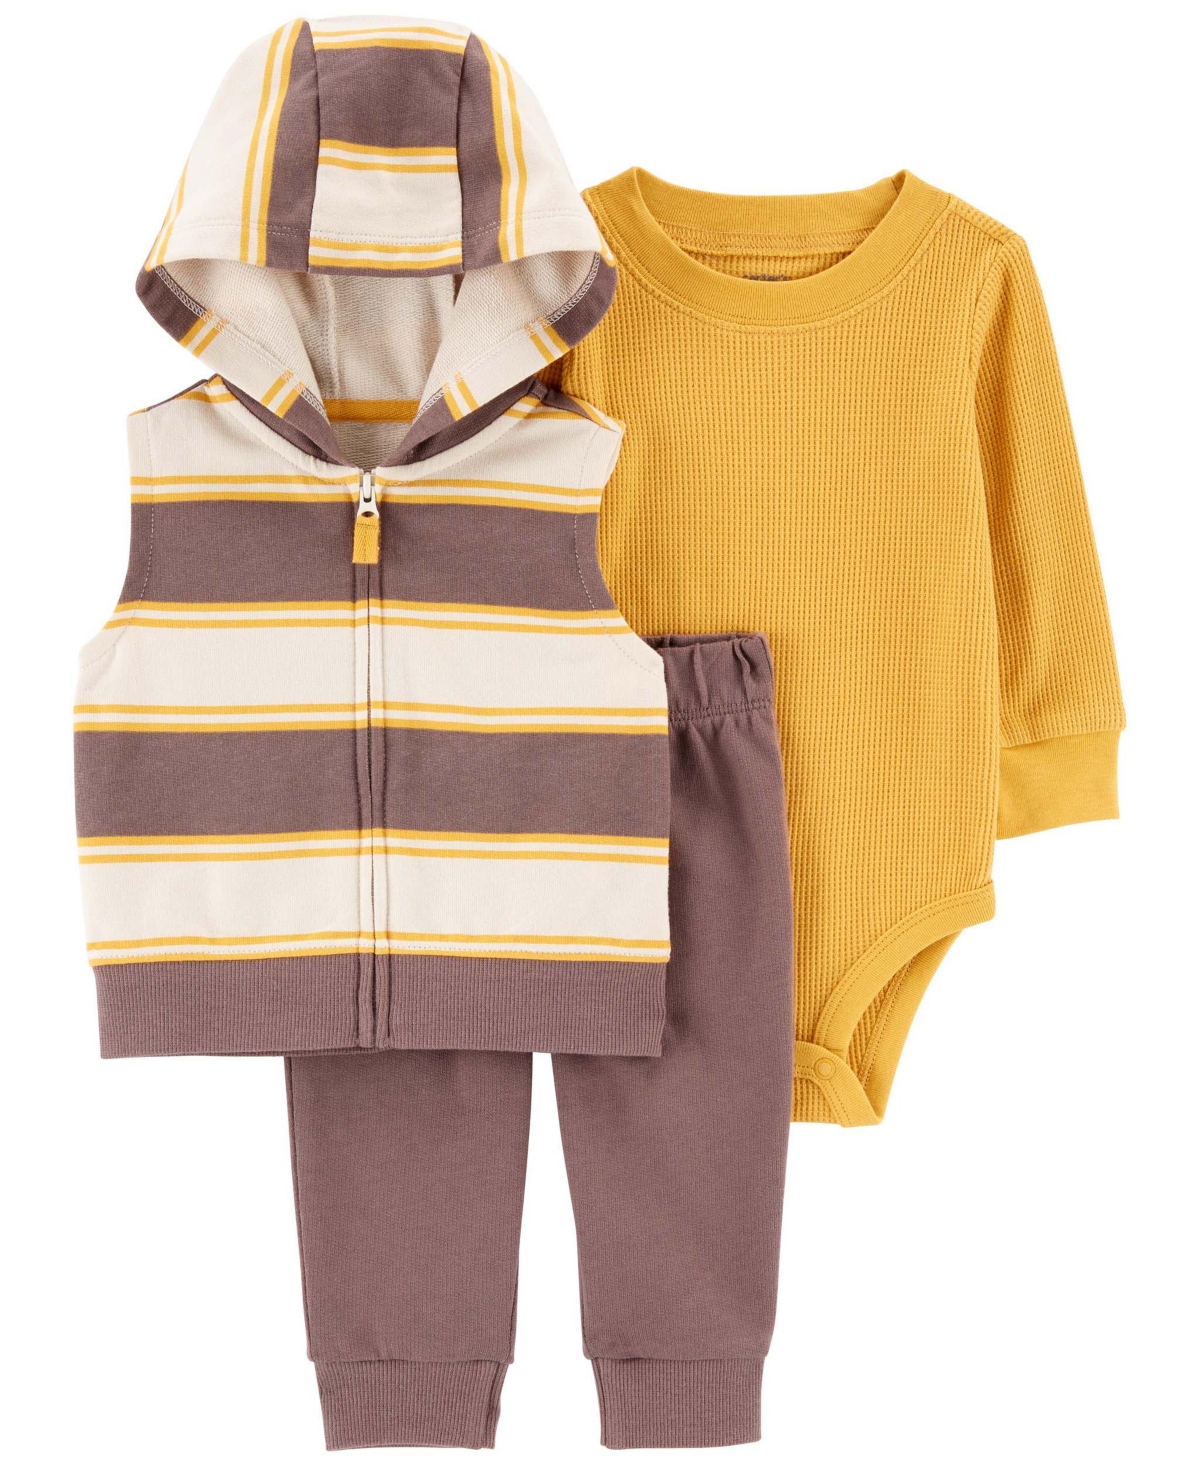 Carter's Baby Boys Striped Hooded Vest, Bodysuit And Pants, 3 Piece Set In Yellow